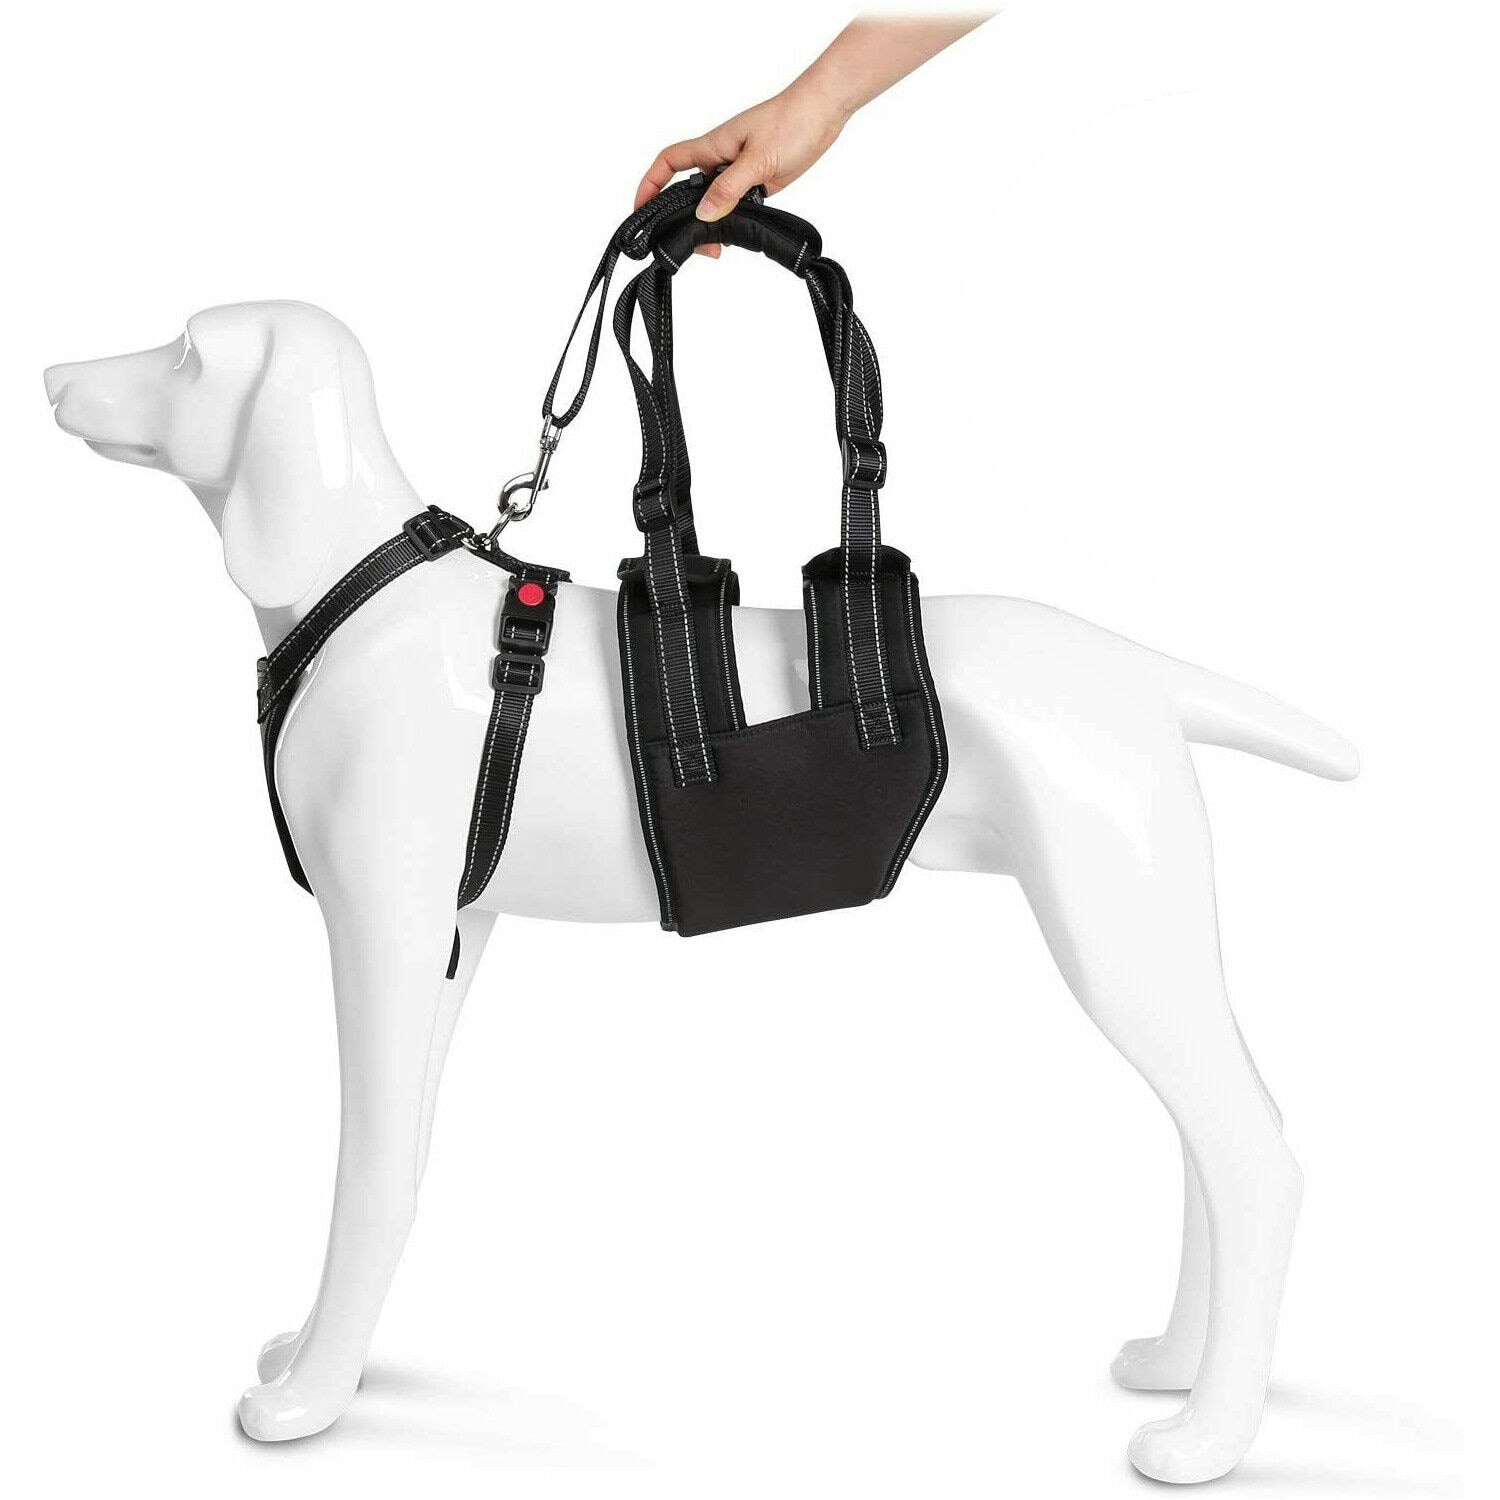 Adjustable Safety Tether Portable Soft-Sided Pet Carrier for Small Dog -  China Pet Carrier and Carrier for Small Dog price